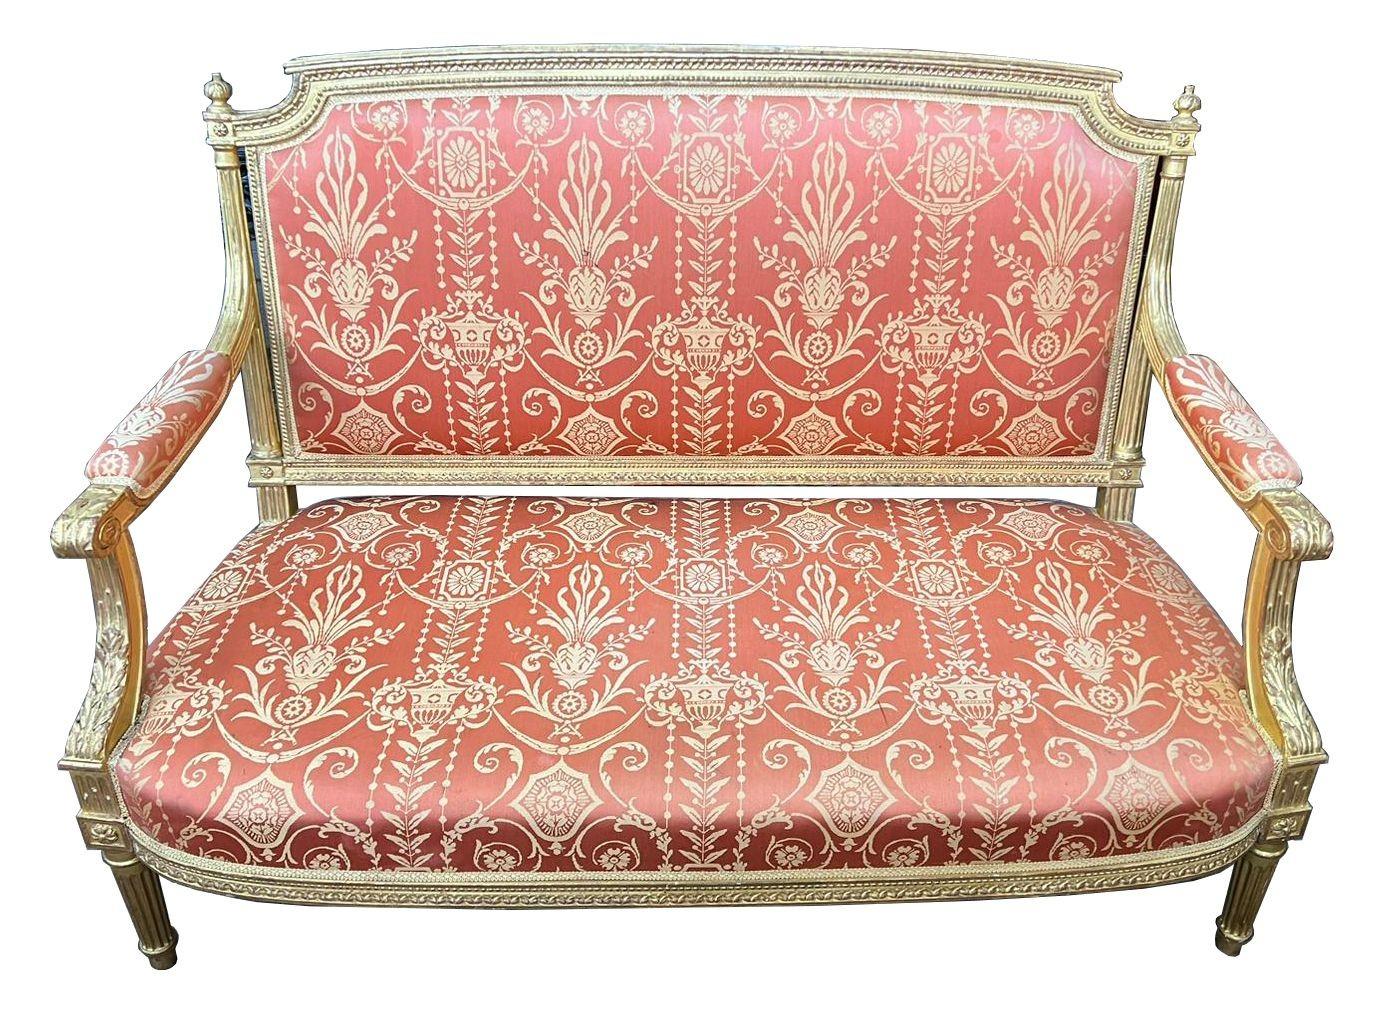 20th Century French Cream painted Louis XVI style sofa, circa 1900 For Sale